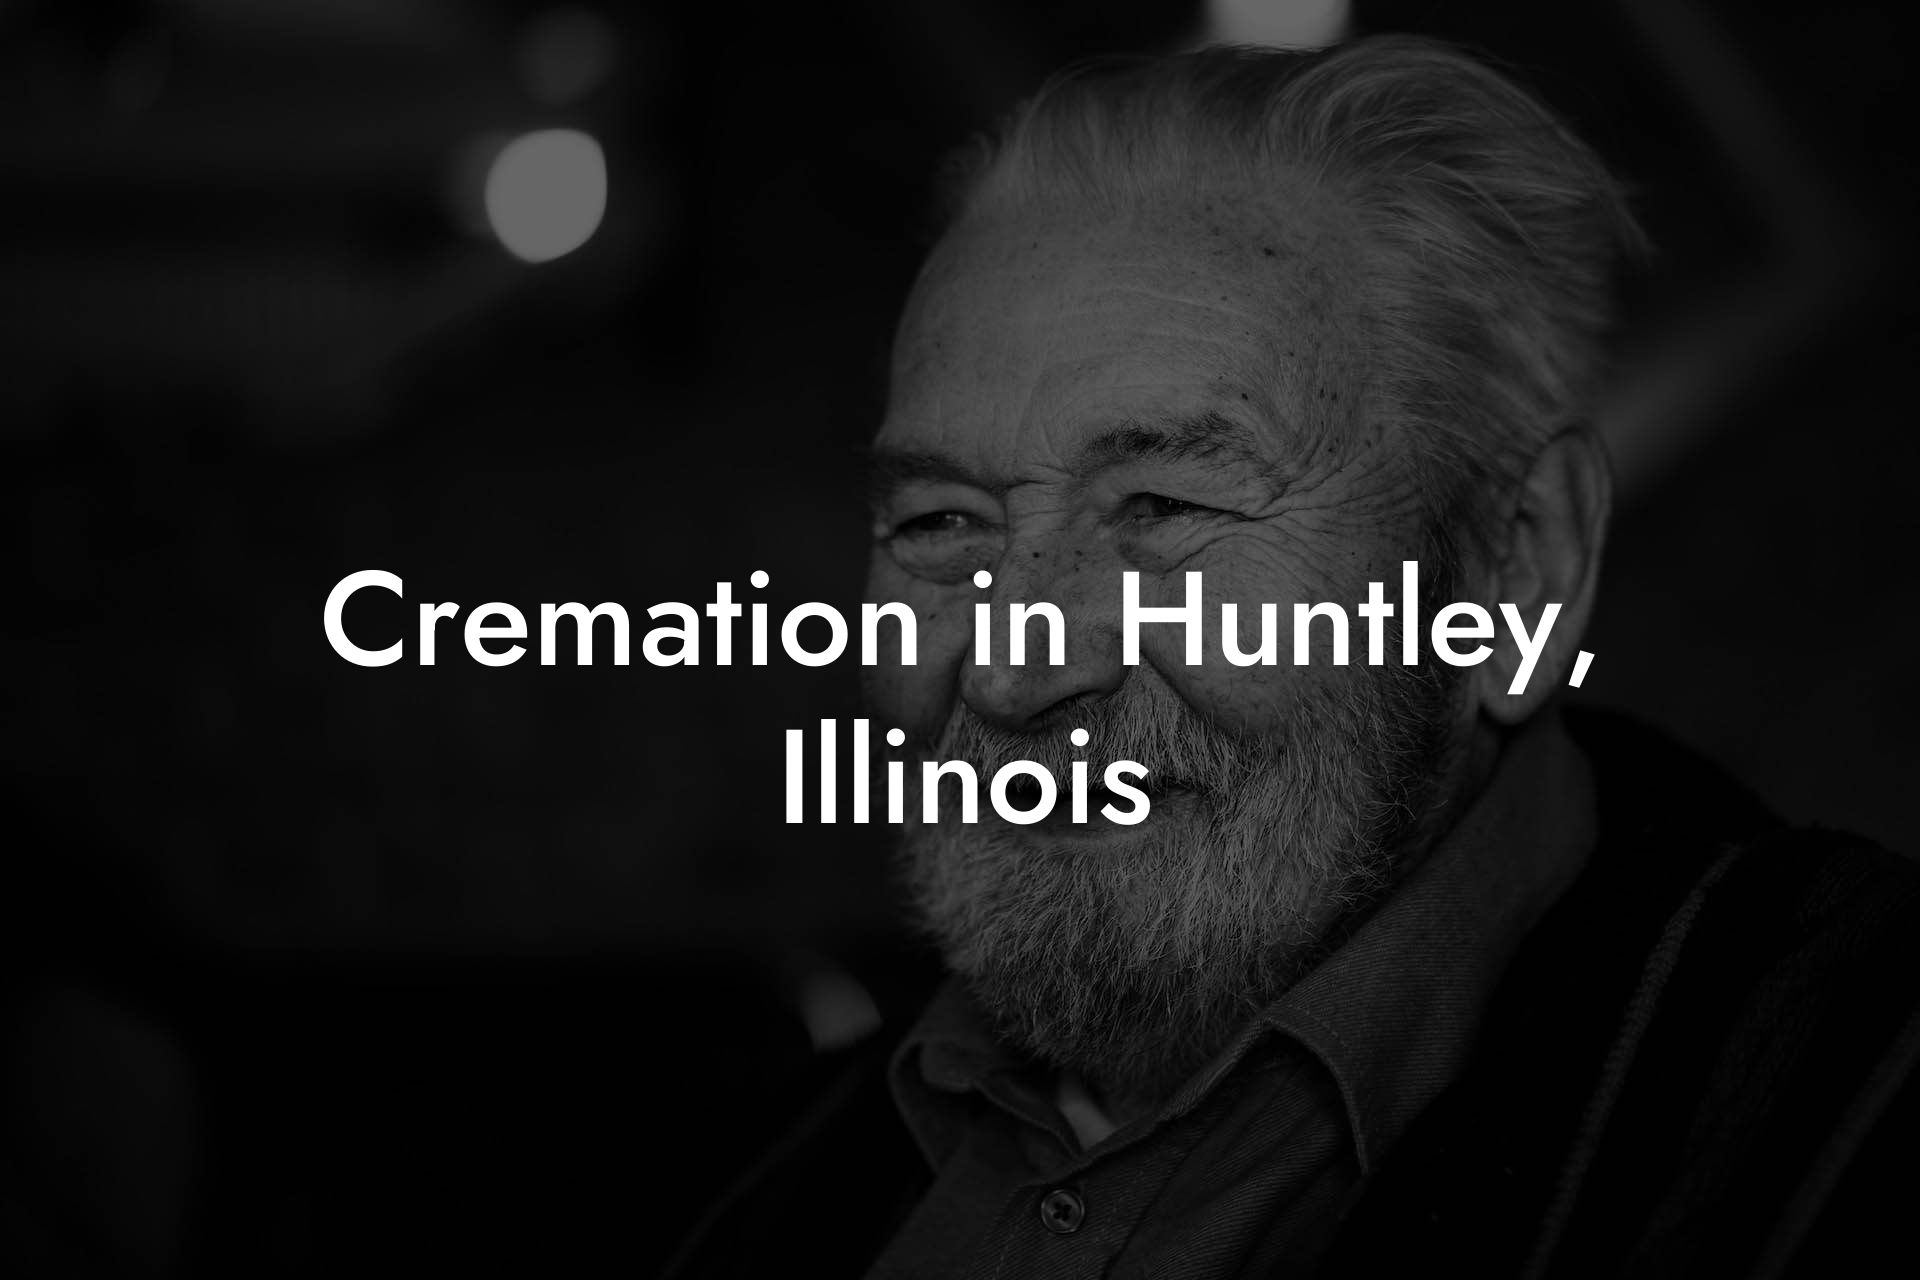 Cremation in Huntley, Illinois